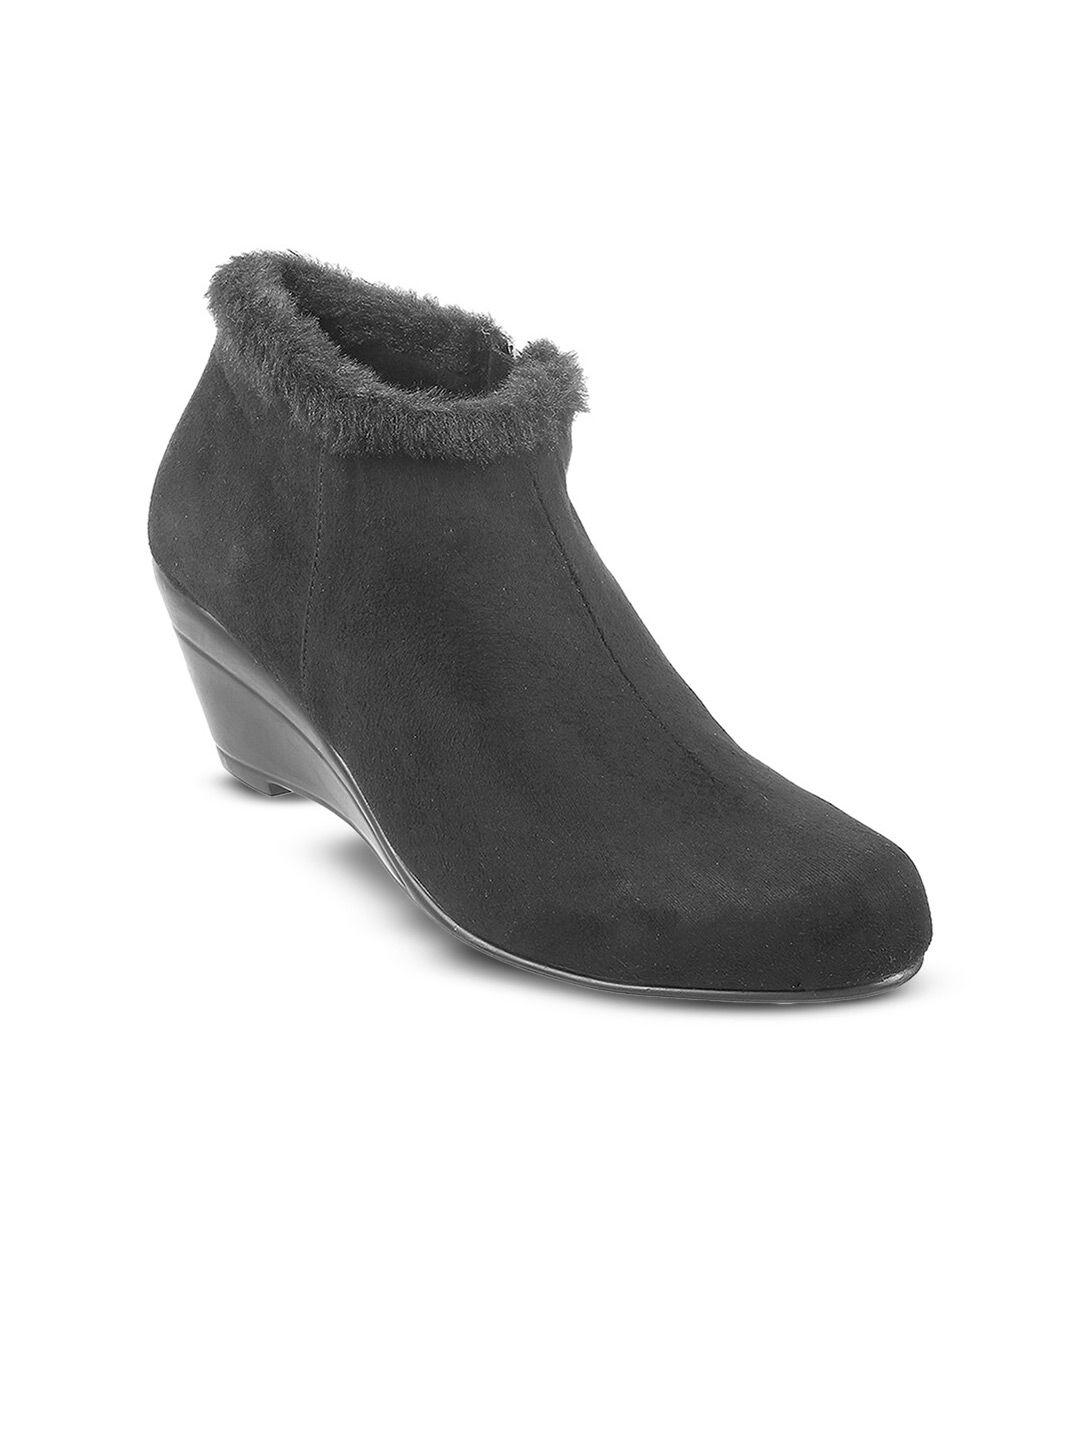 mochi-round-toe-wedge-heeled-mid-top-boots-with-faux-fur-trim-detail